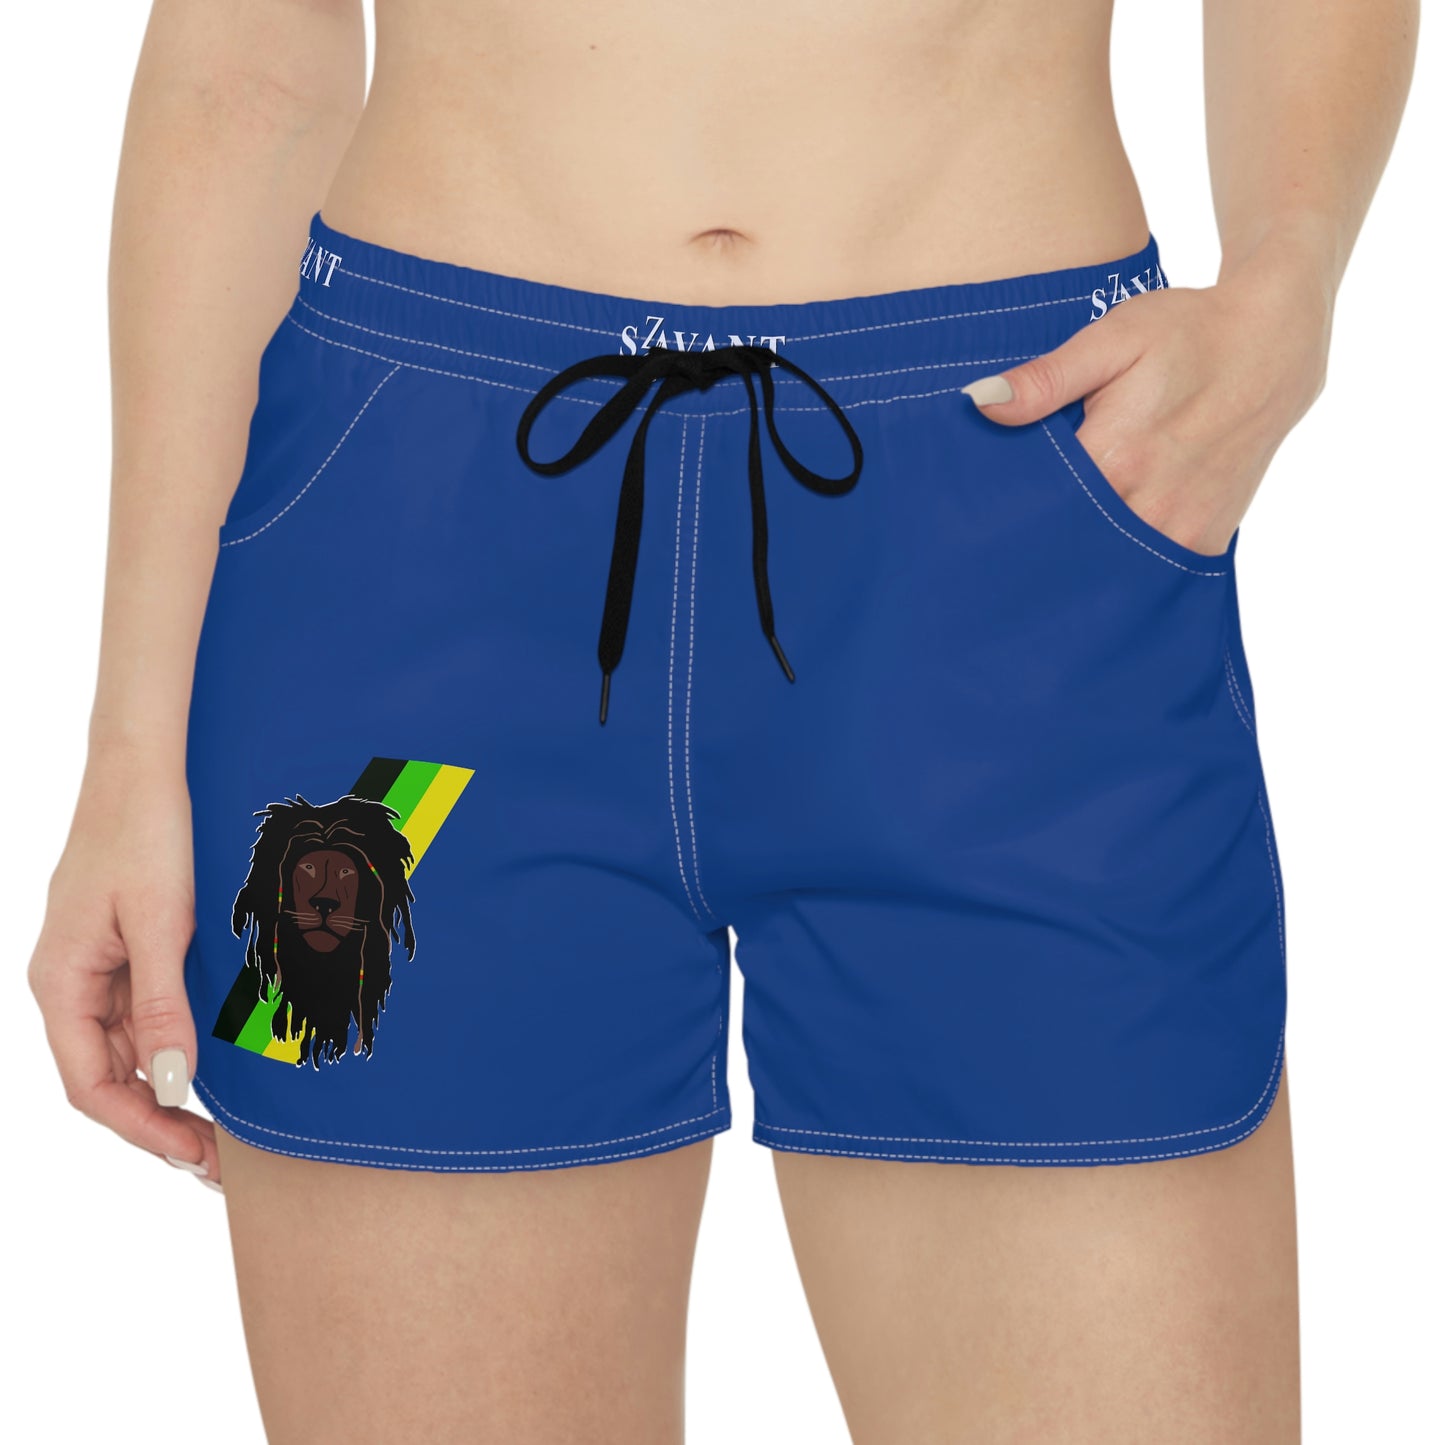 Women's Casual Drawstring Shorts - Blue (With JA Colors)